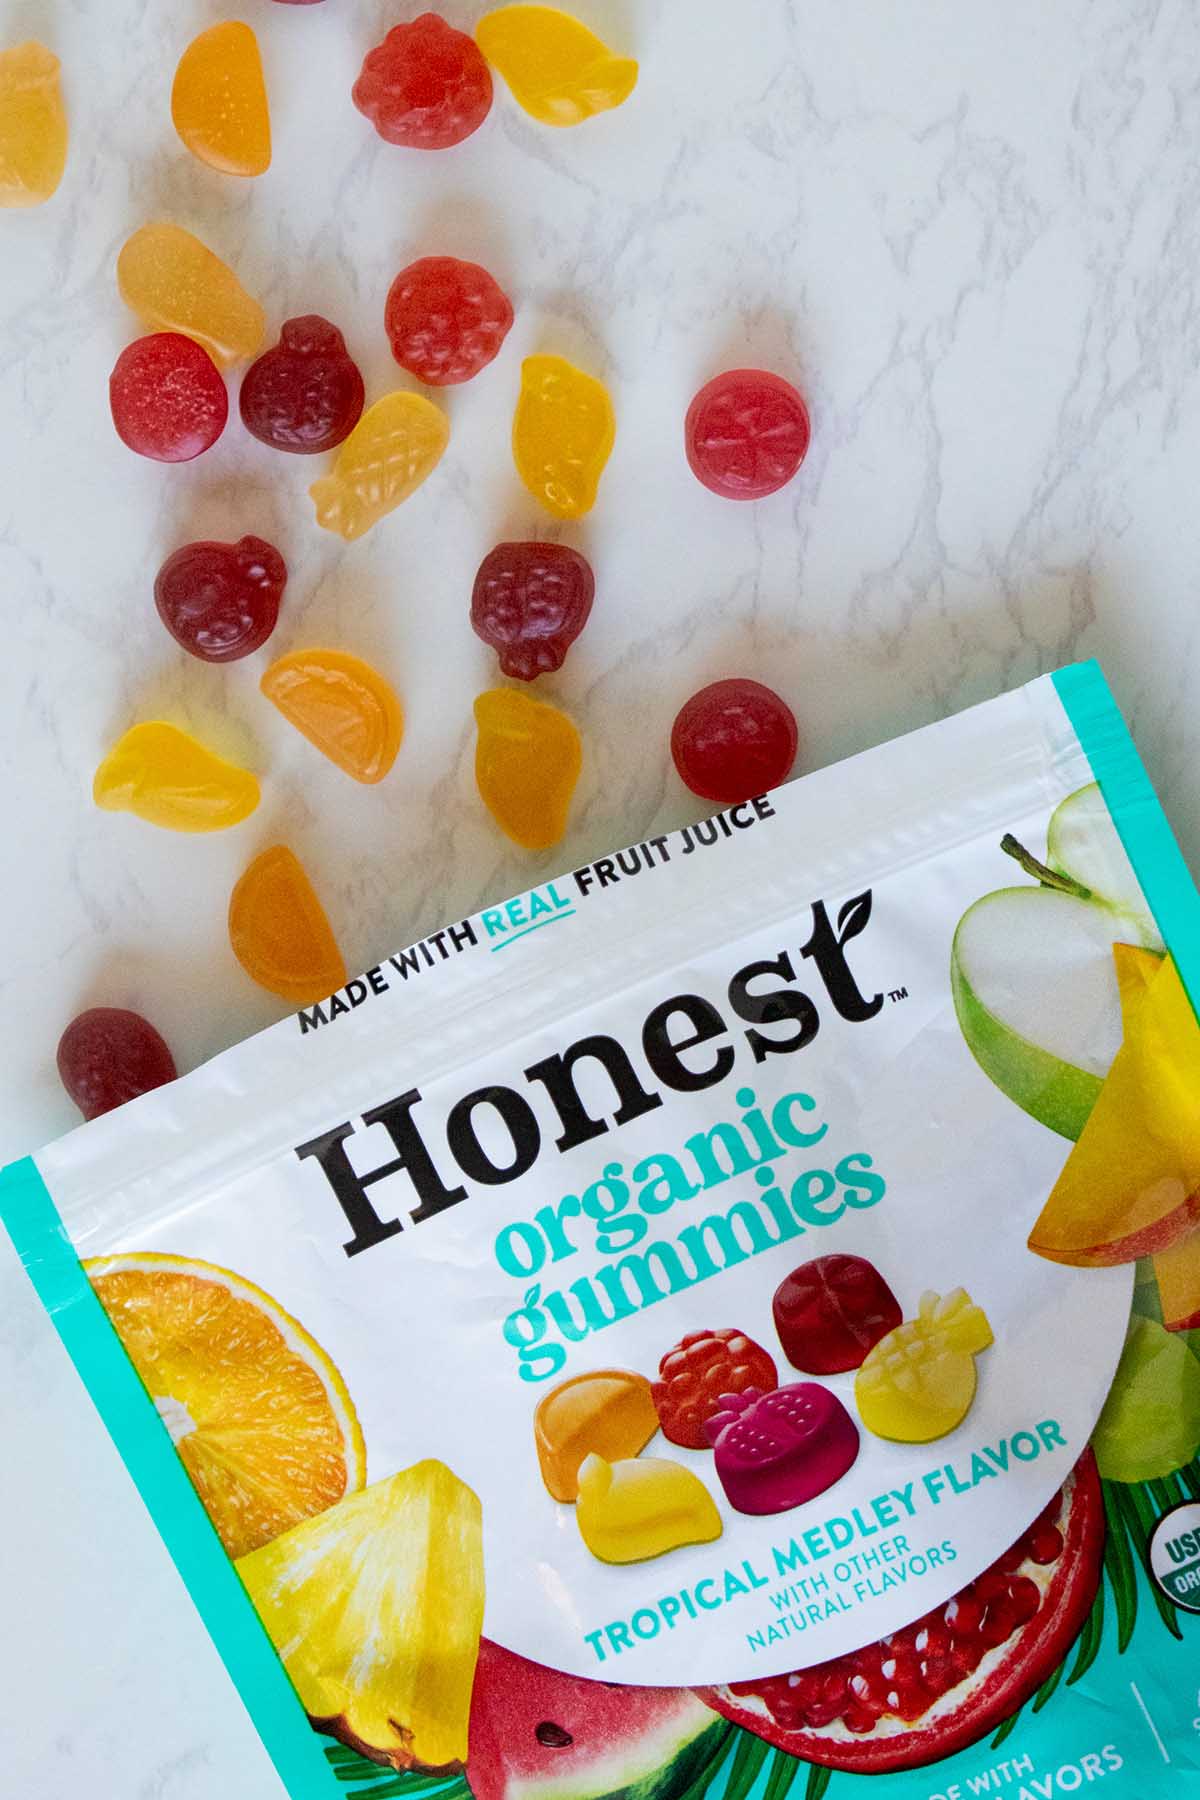 bag of Honest organic vegan gummies with gummies spilling out onto the table